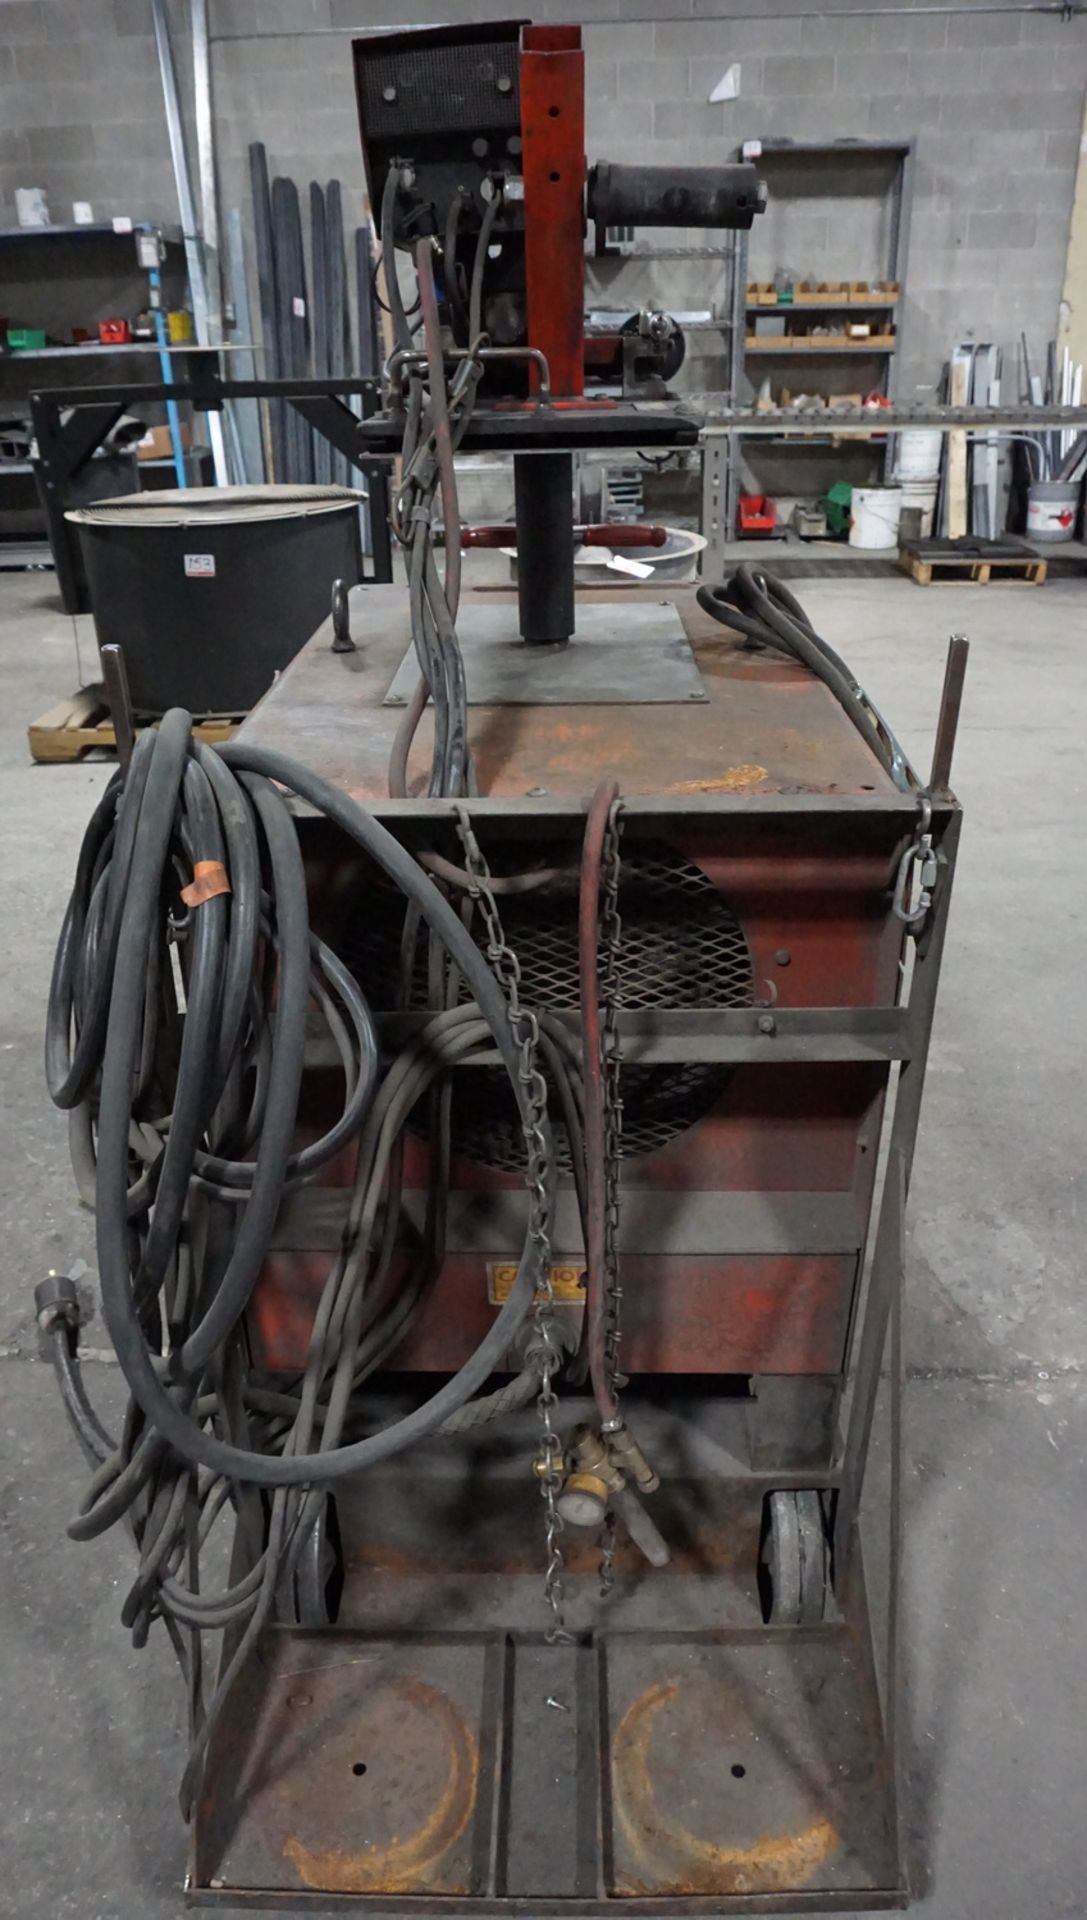 CANOX C-CP-250TS 250 AMP WELDER W/ CANOX CIDE MIGMATIC FEEDER - Image 2 of 3